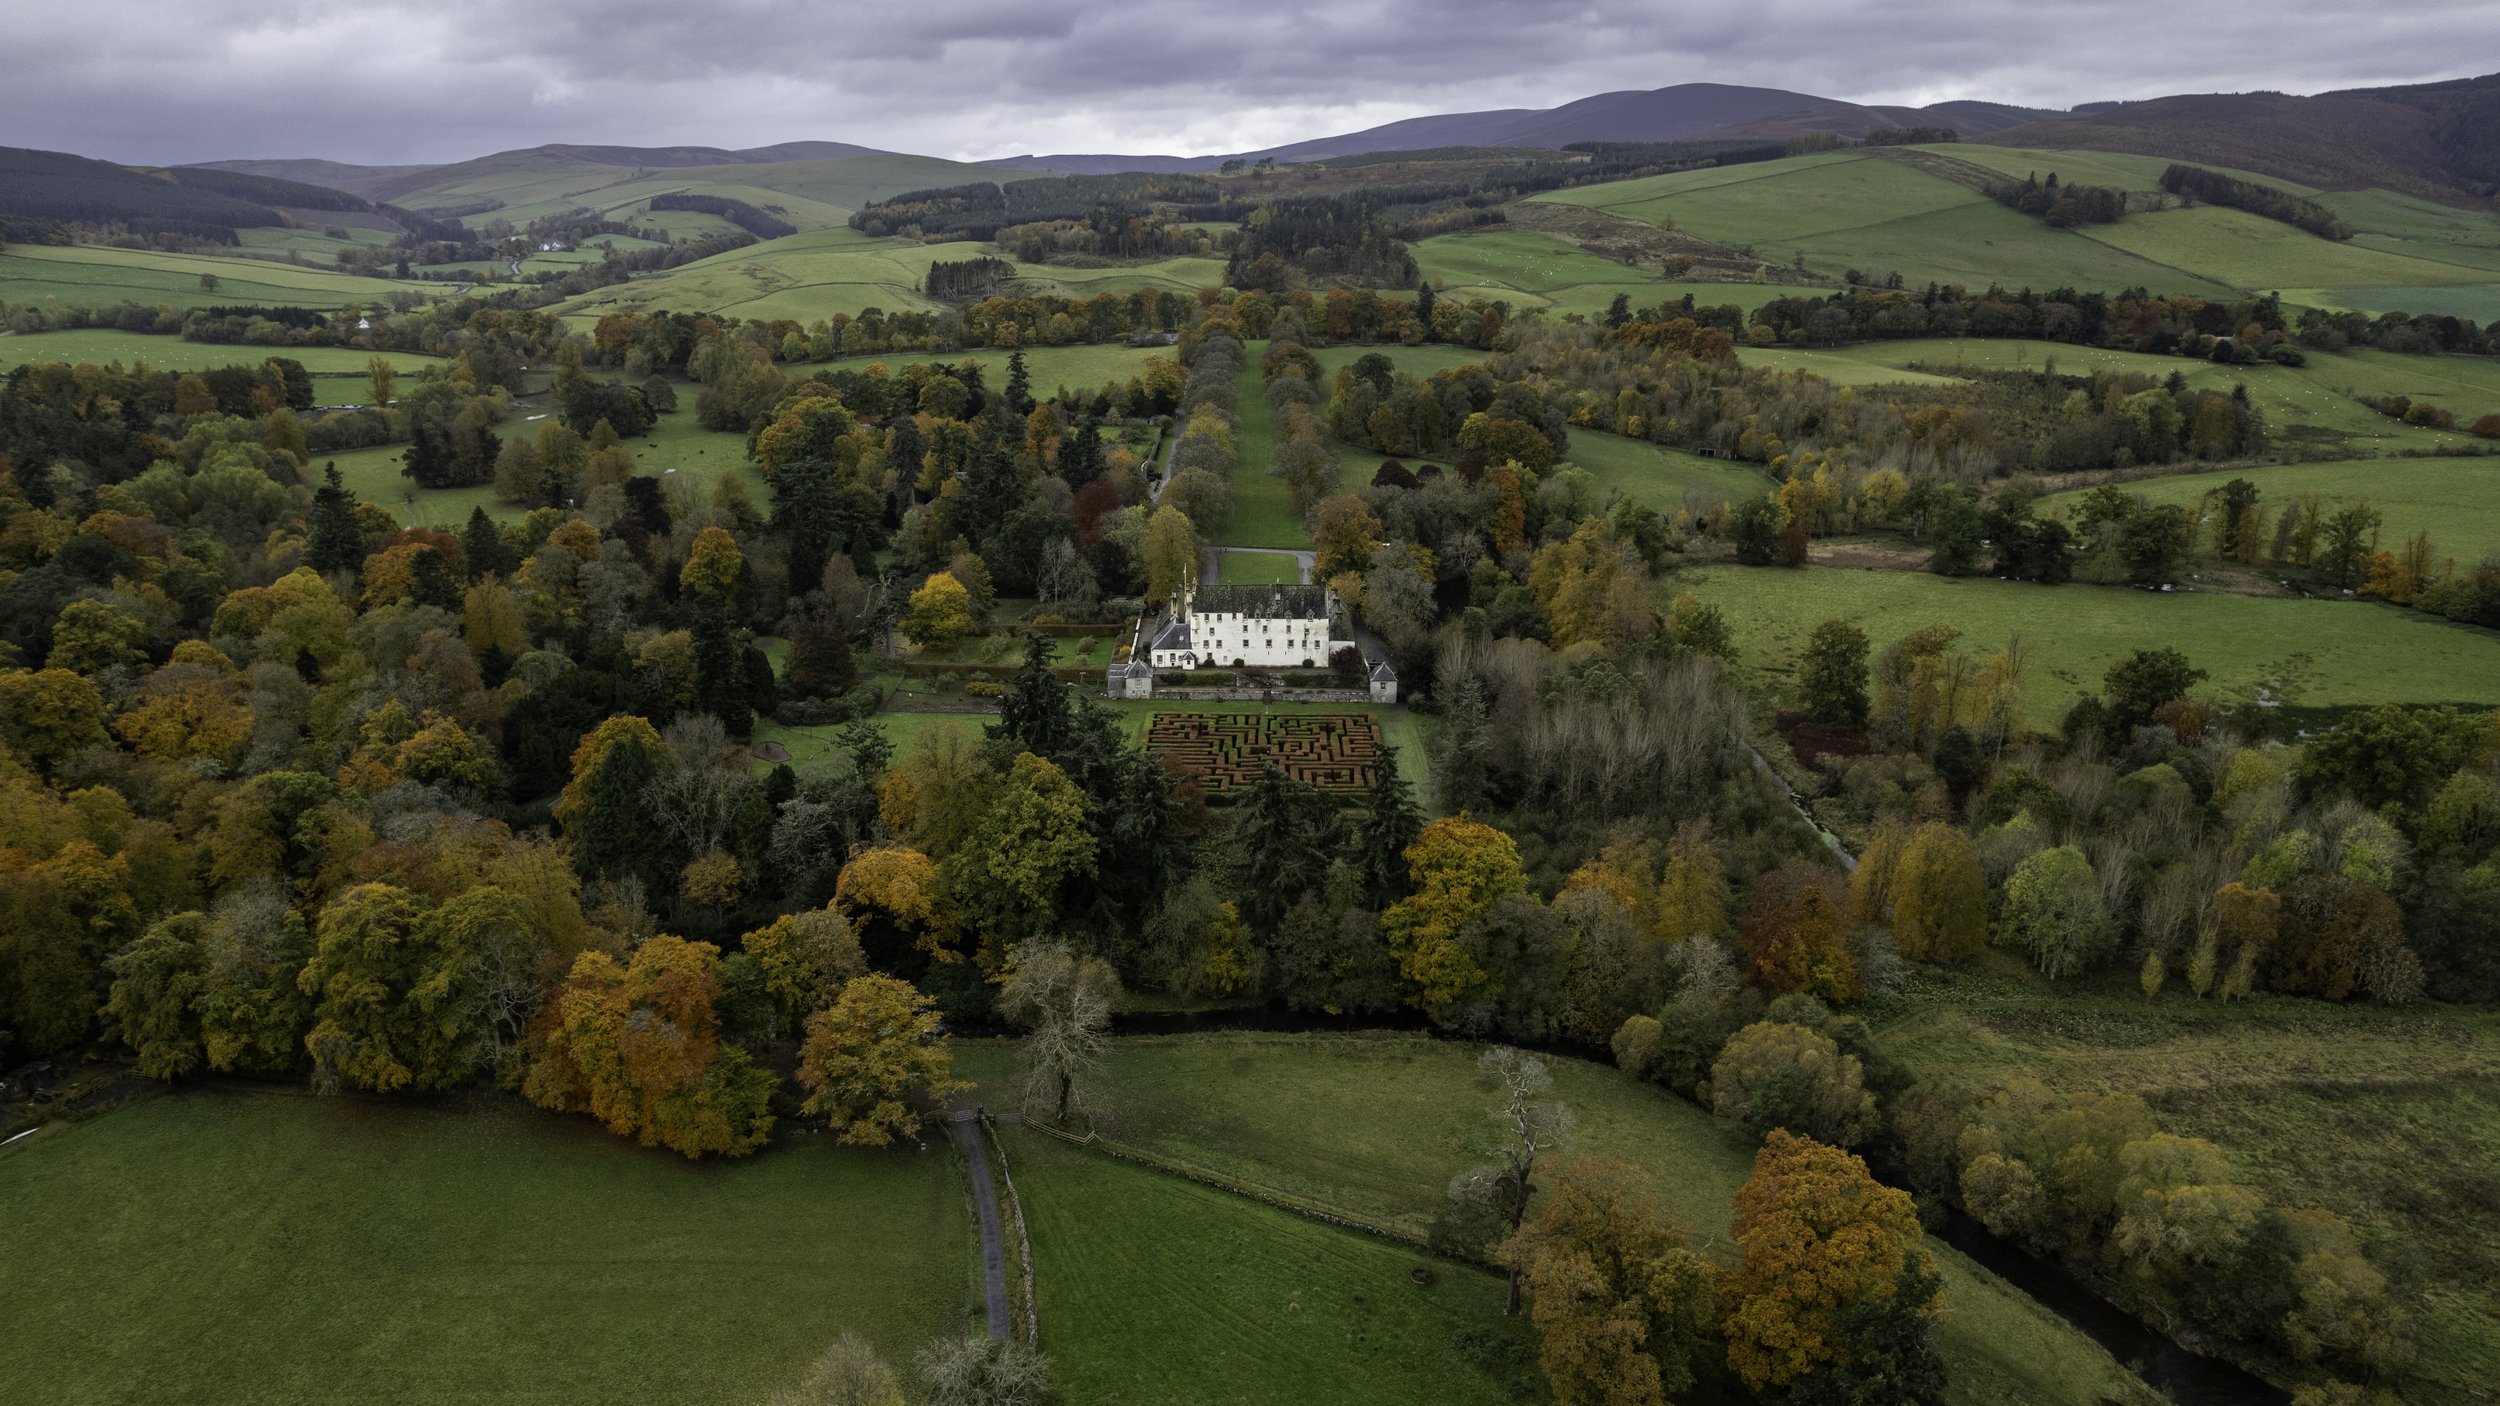 Traquair House and policies